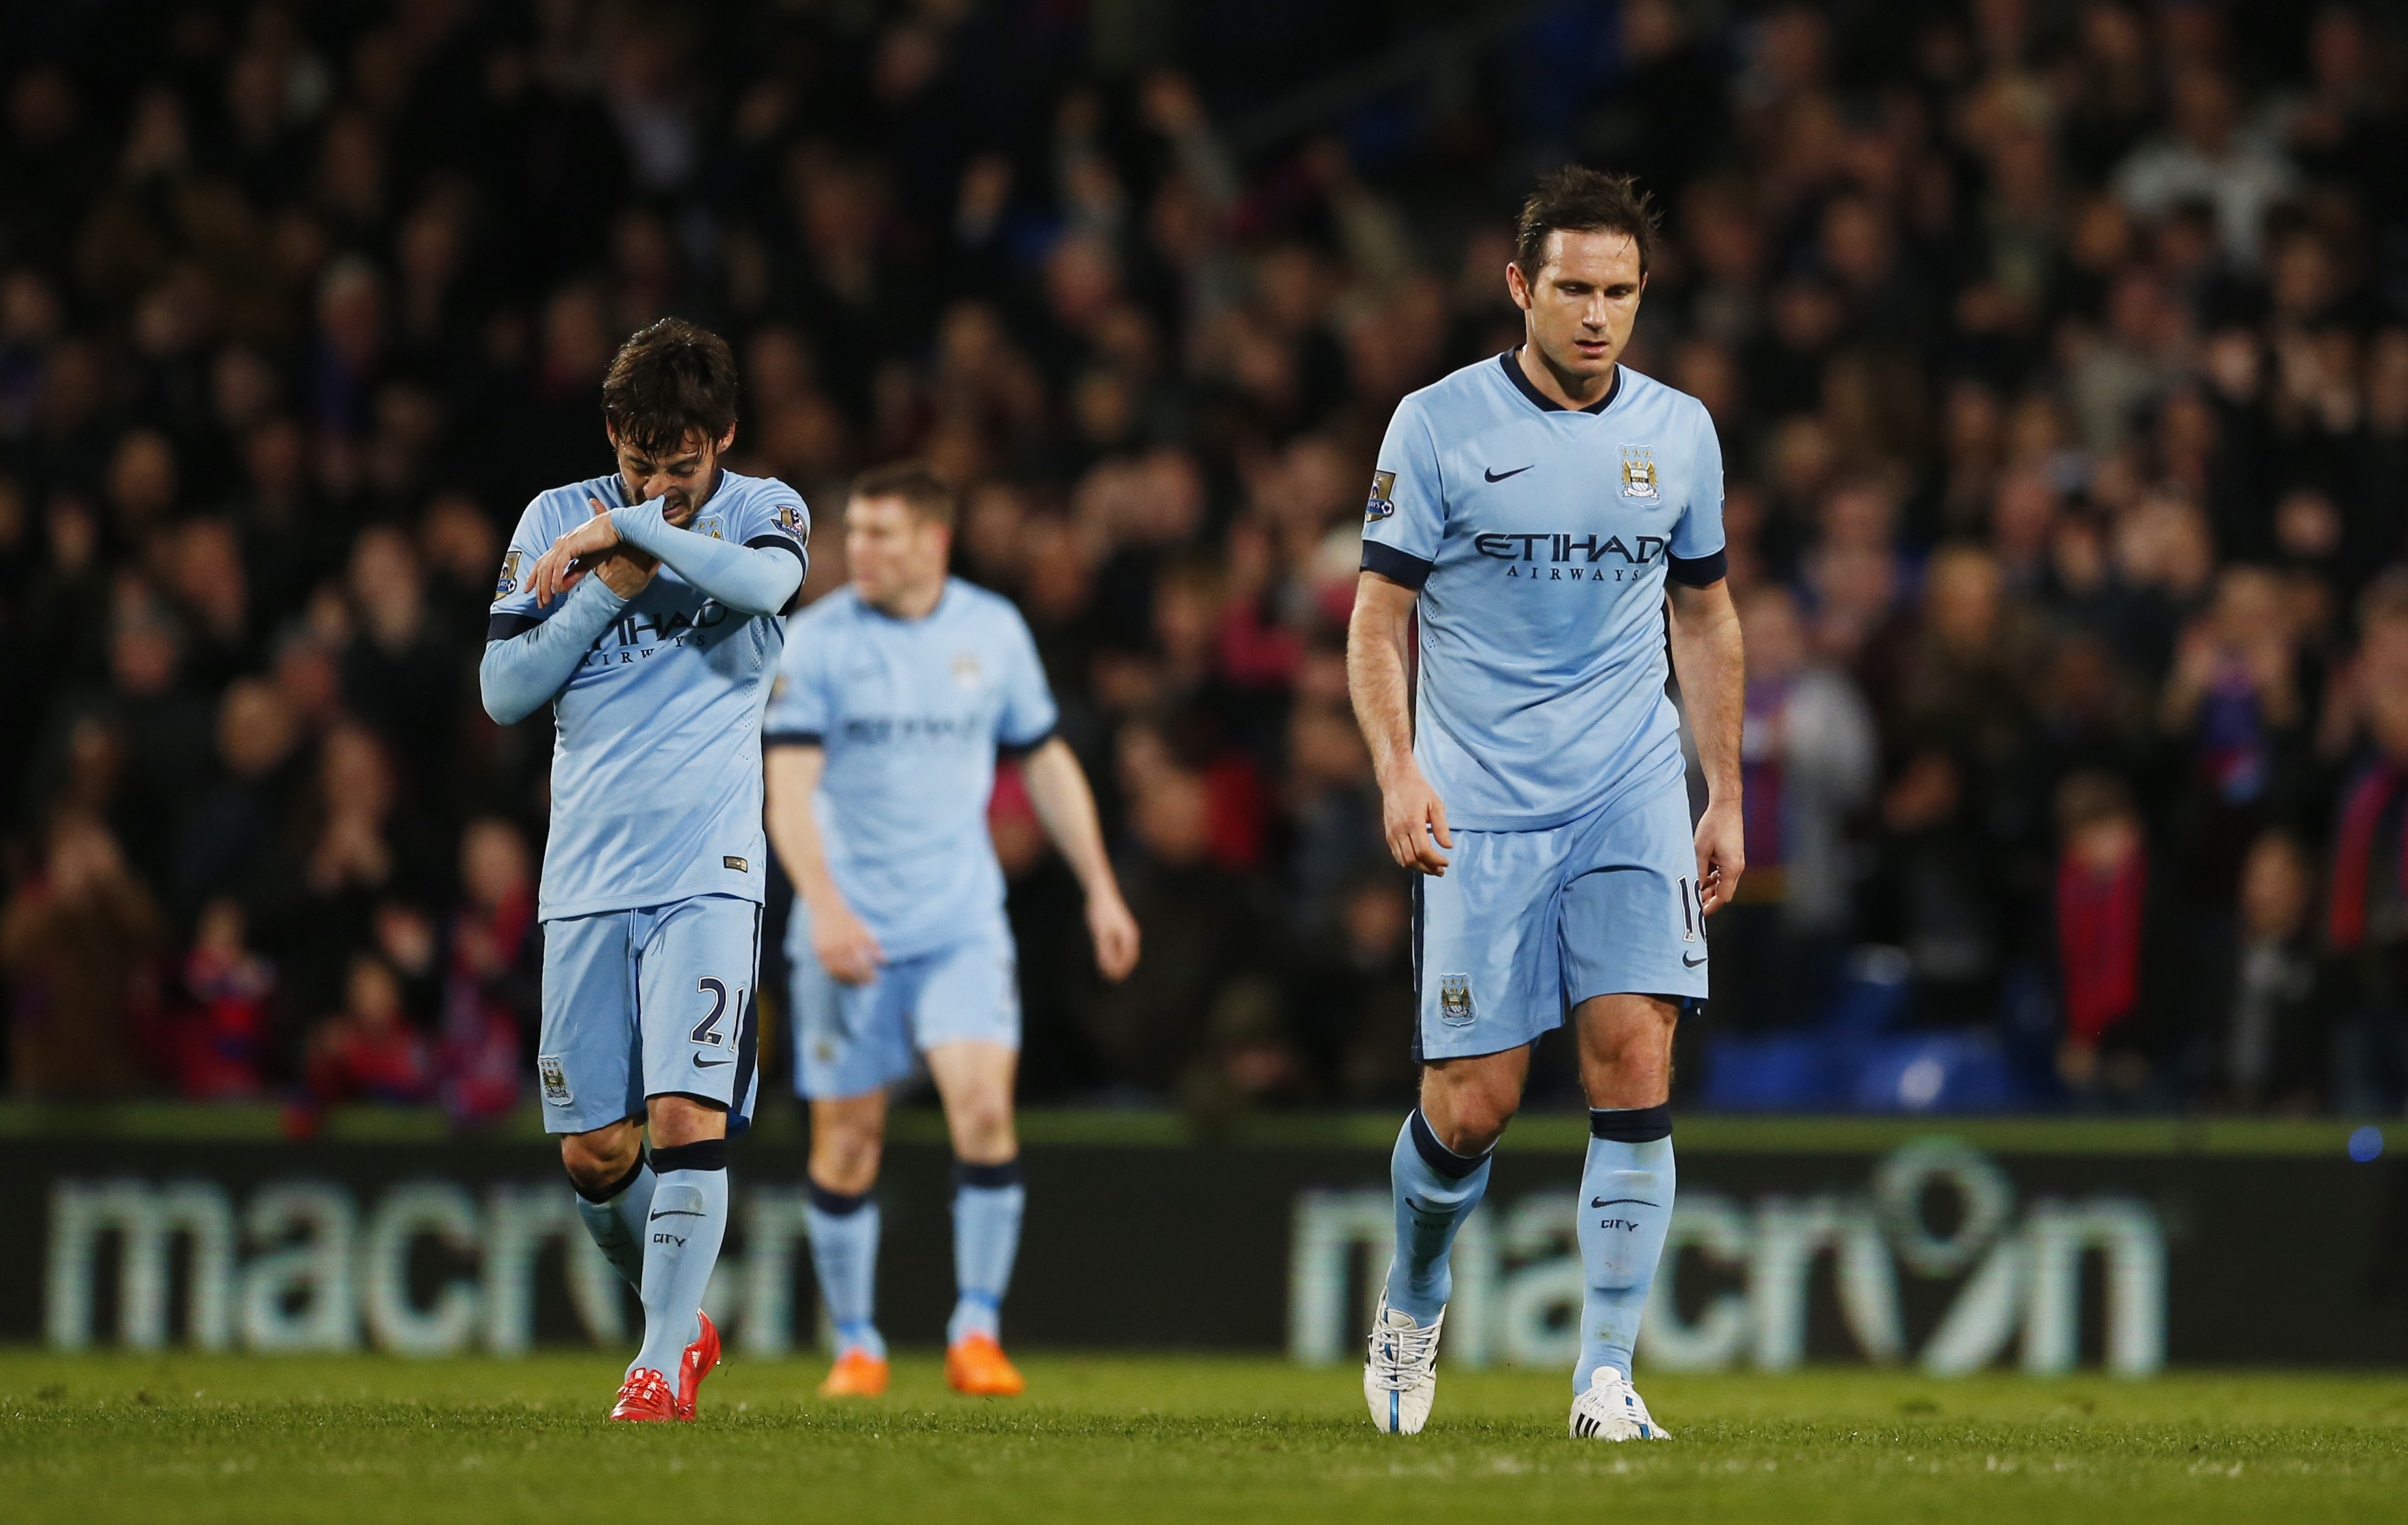 City's title hopes in tatters after defeat at Palace